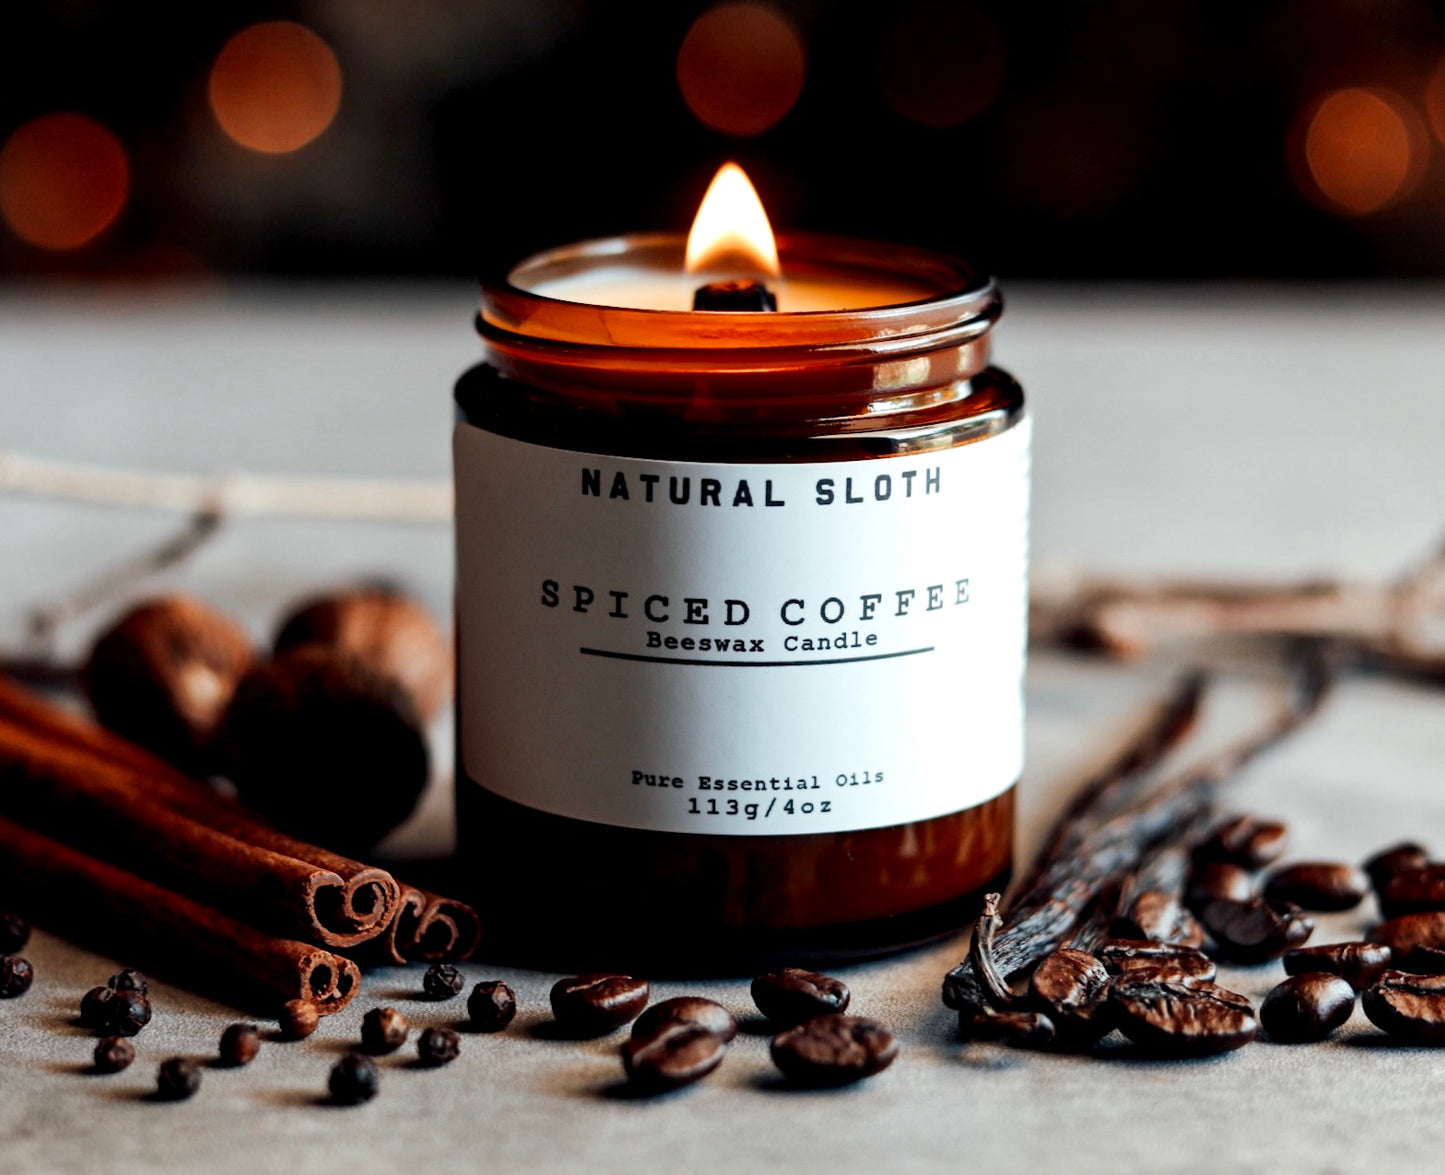 Spiced Coffee Beeswax Candles with Essential Oils